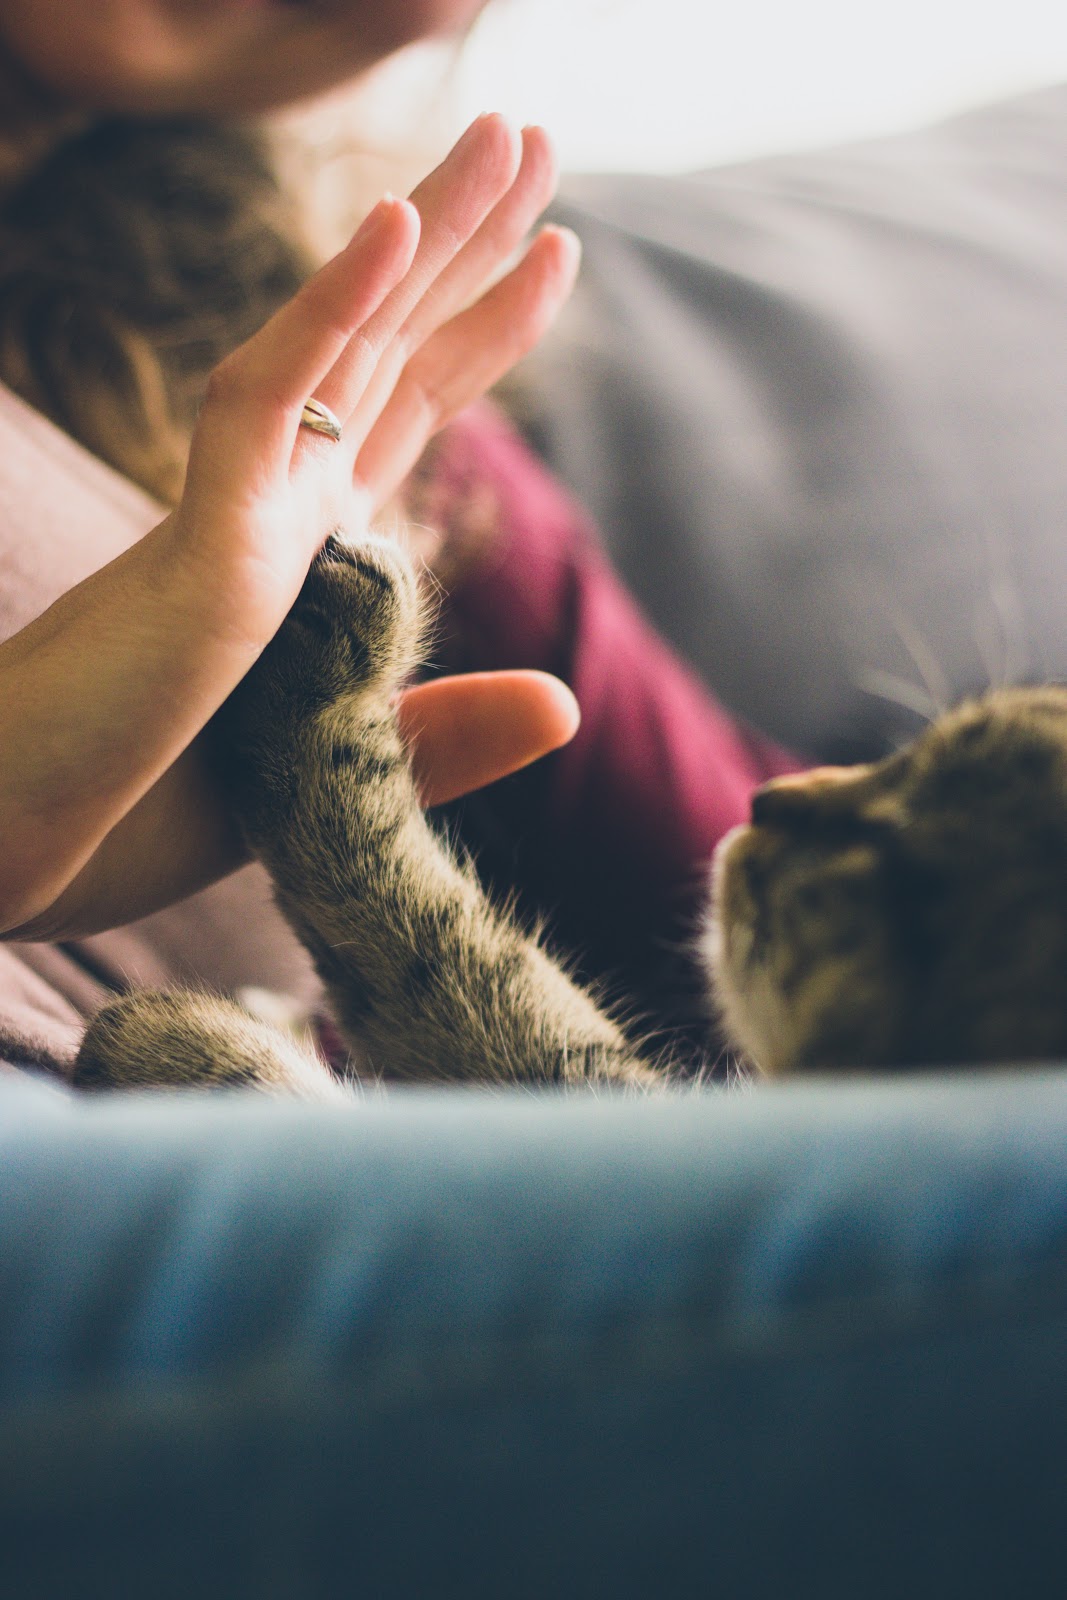 5 Ways To Remember Your Pet After They Have Gone